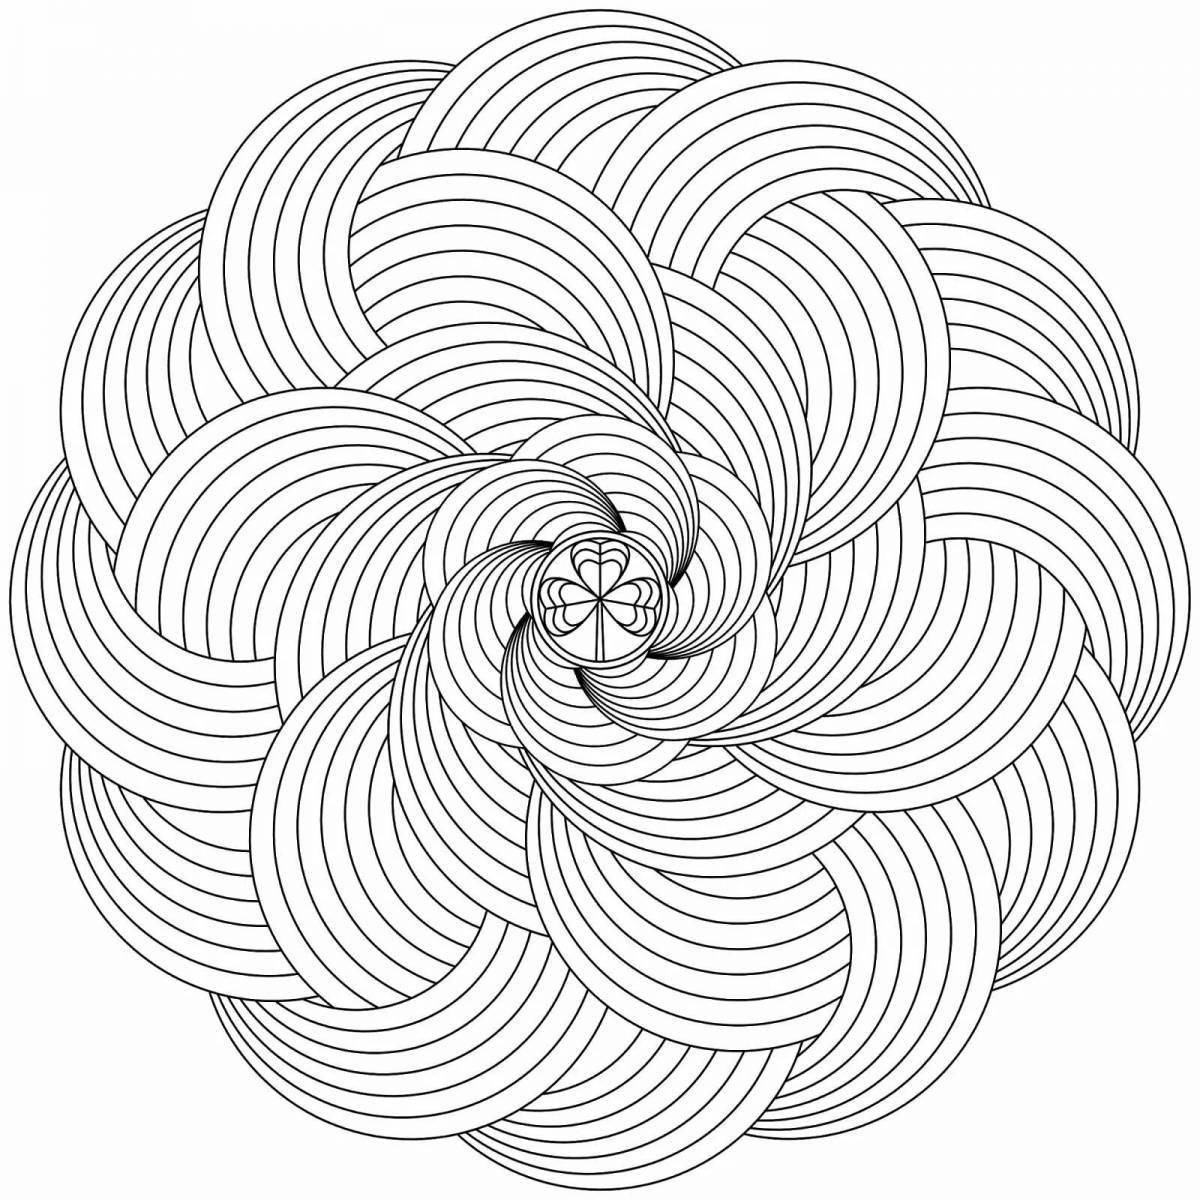 Exciting anti-stress coloring spirals